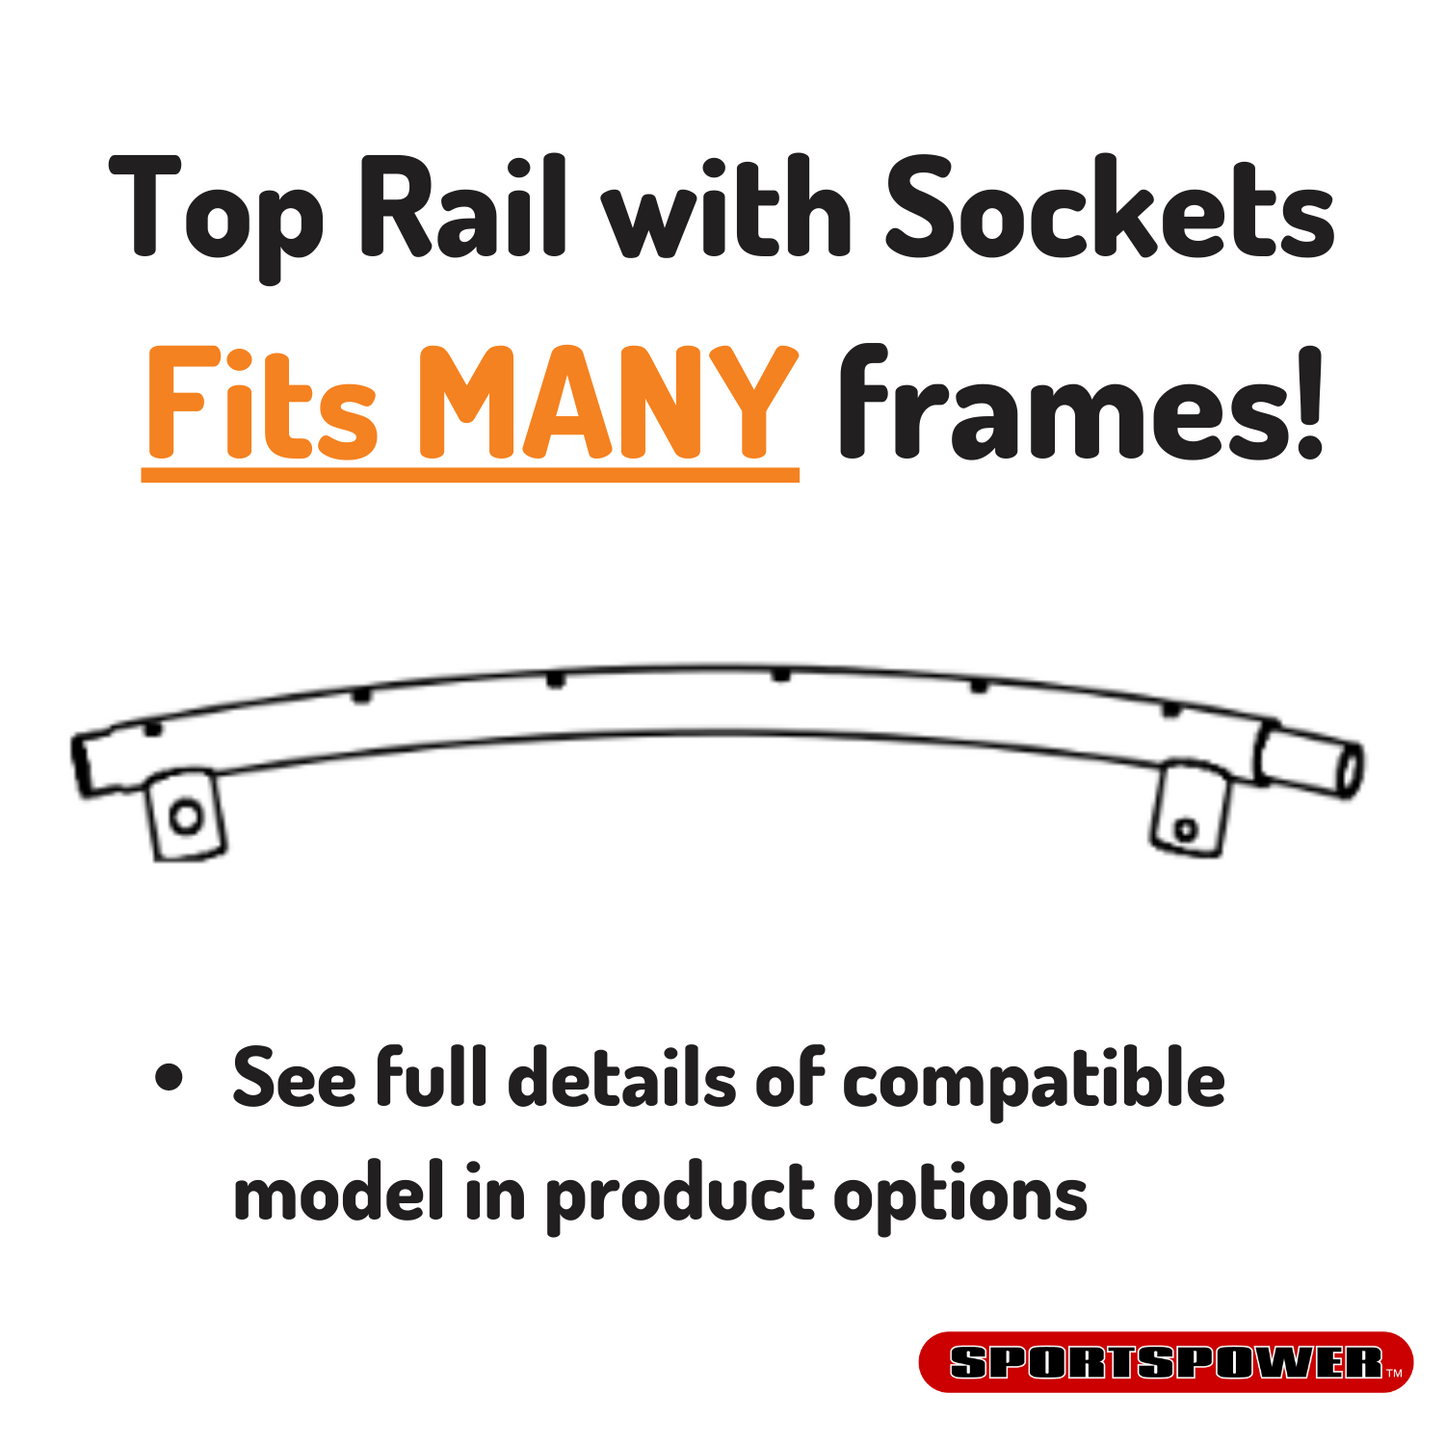 Top Rail with Sockets for the 15' Models